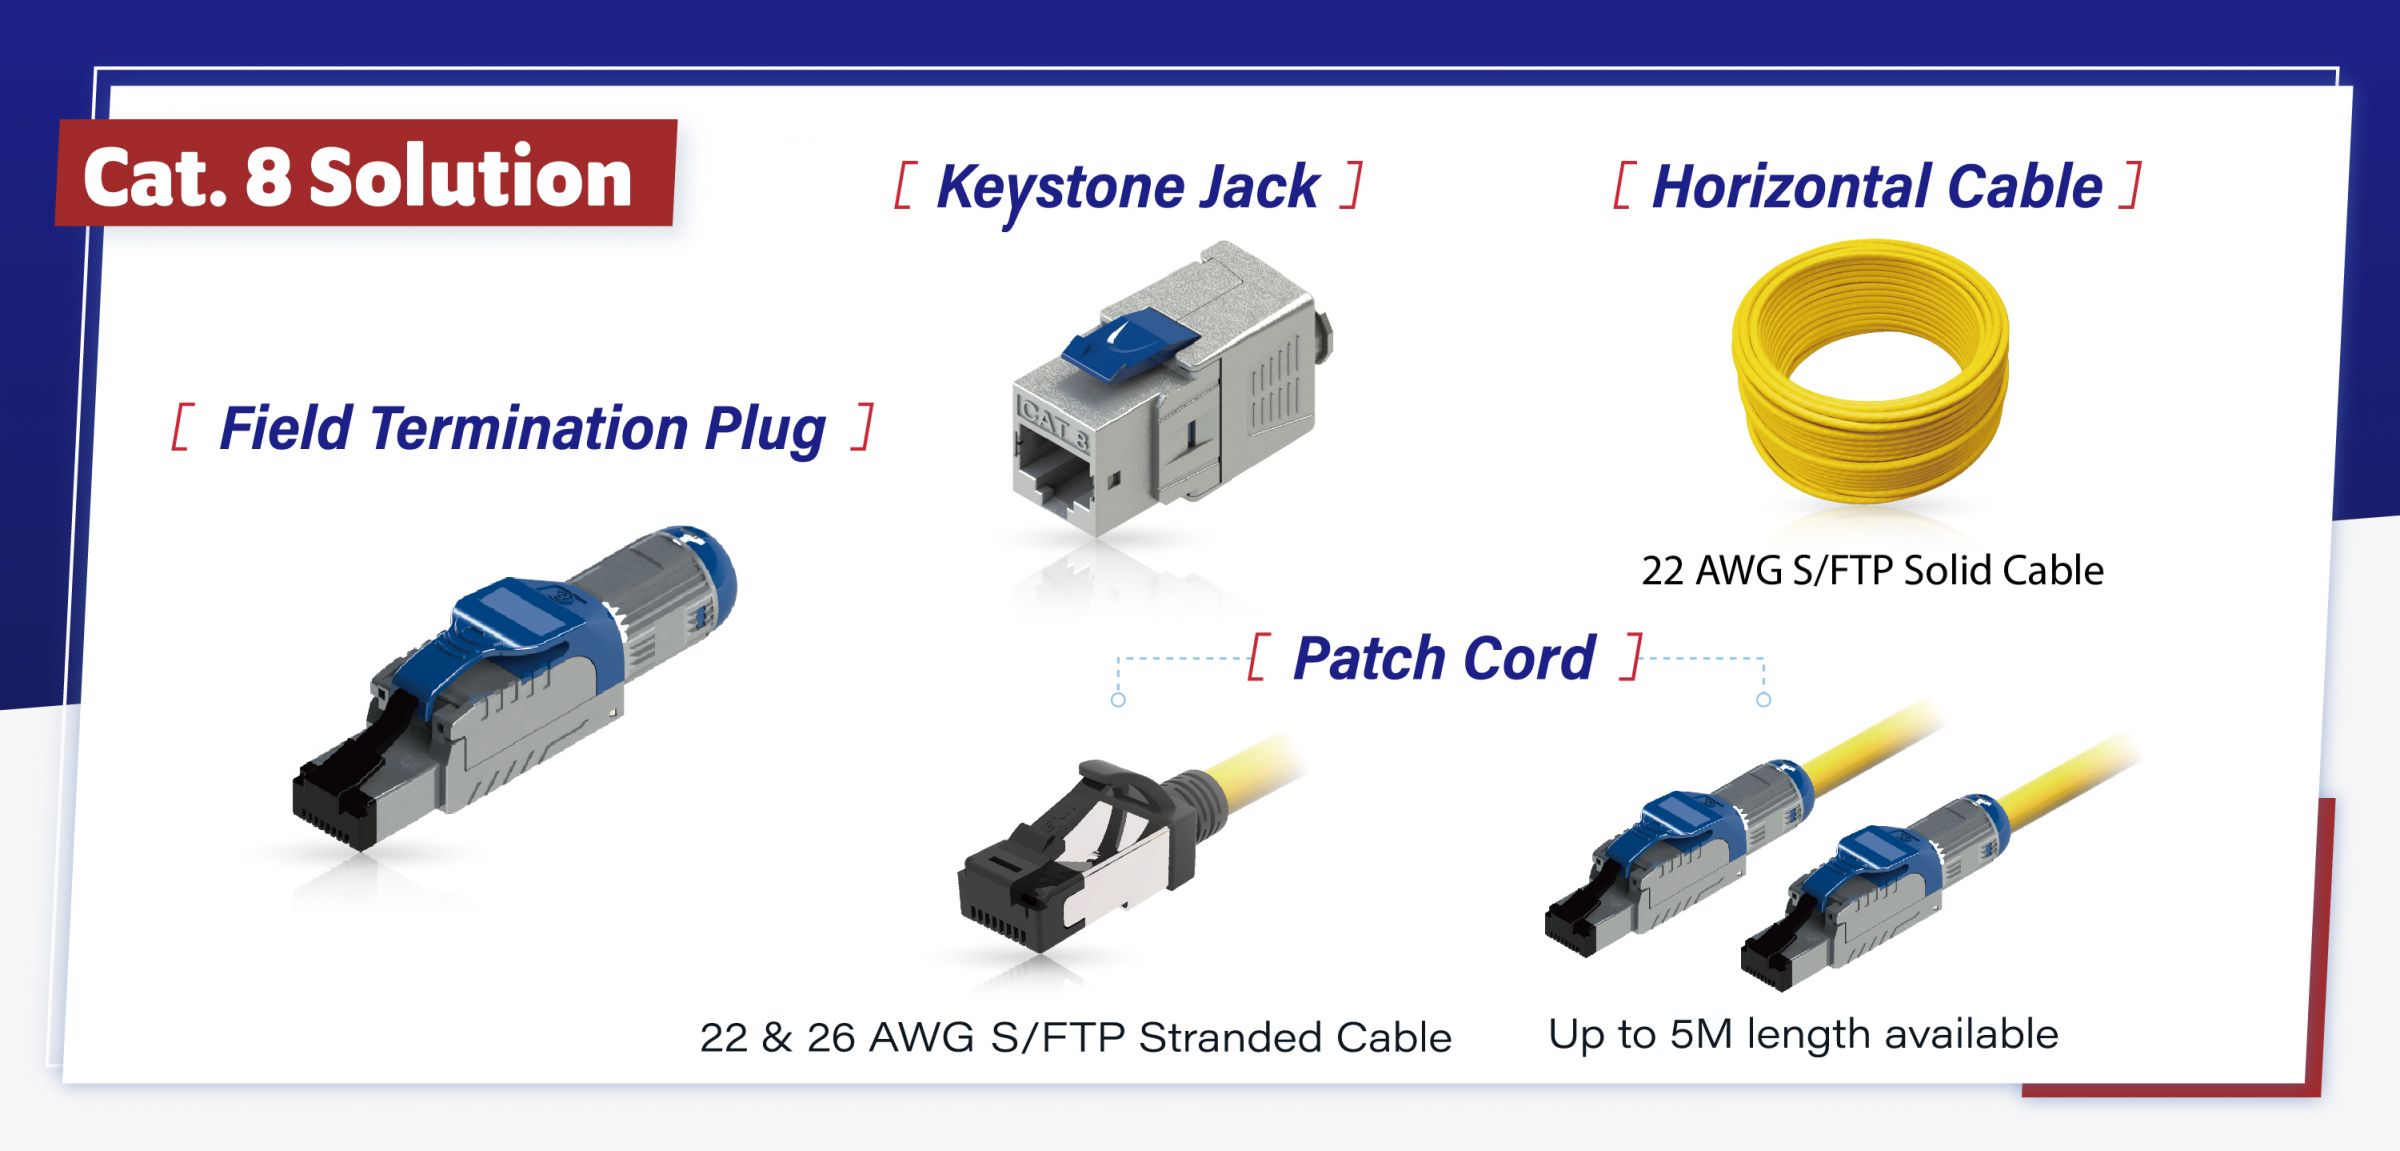 rj45 ethernet category 8 cabling solution connector cable keystone jack